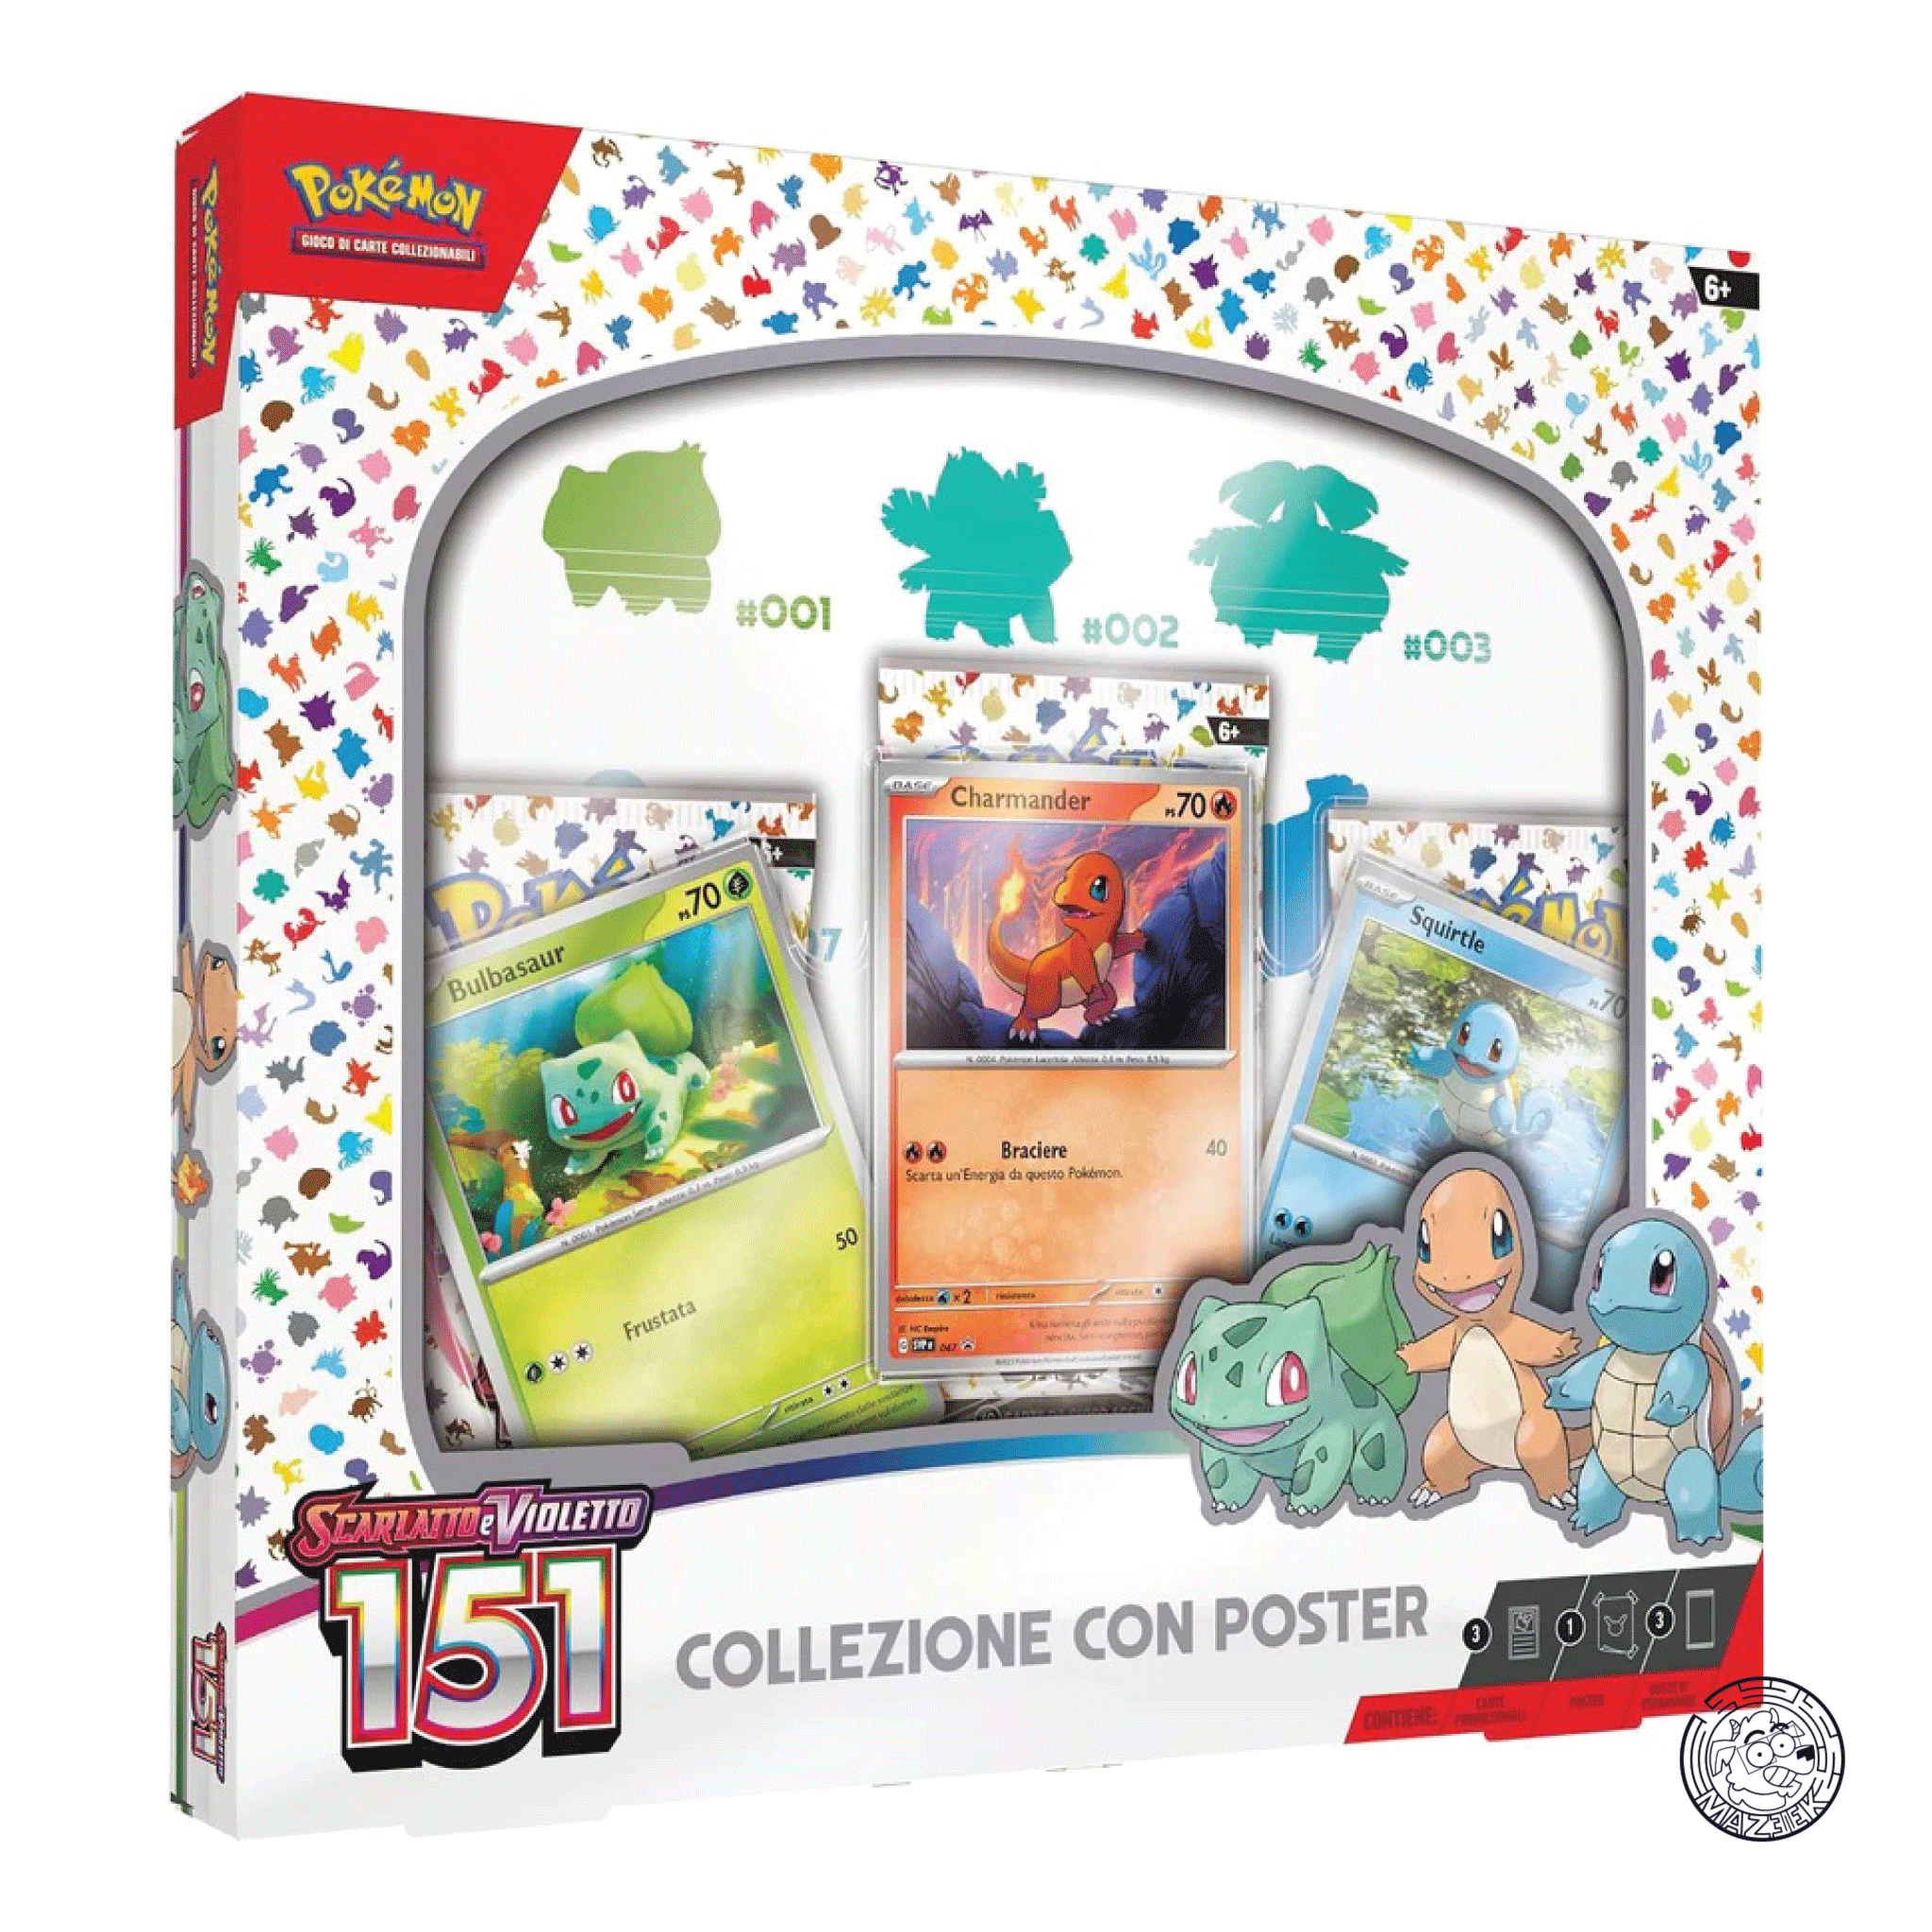 Pokemon! BOX: Scarlet and Violet - Collection 151 with Poster ITA